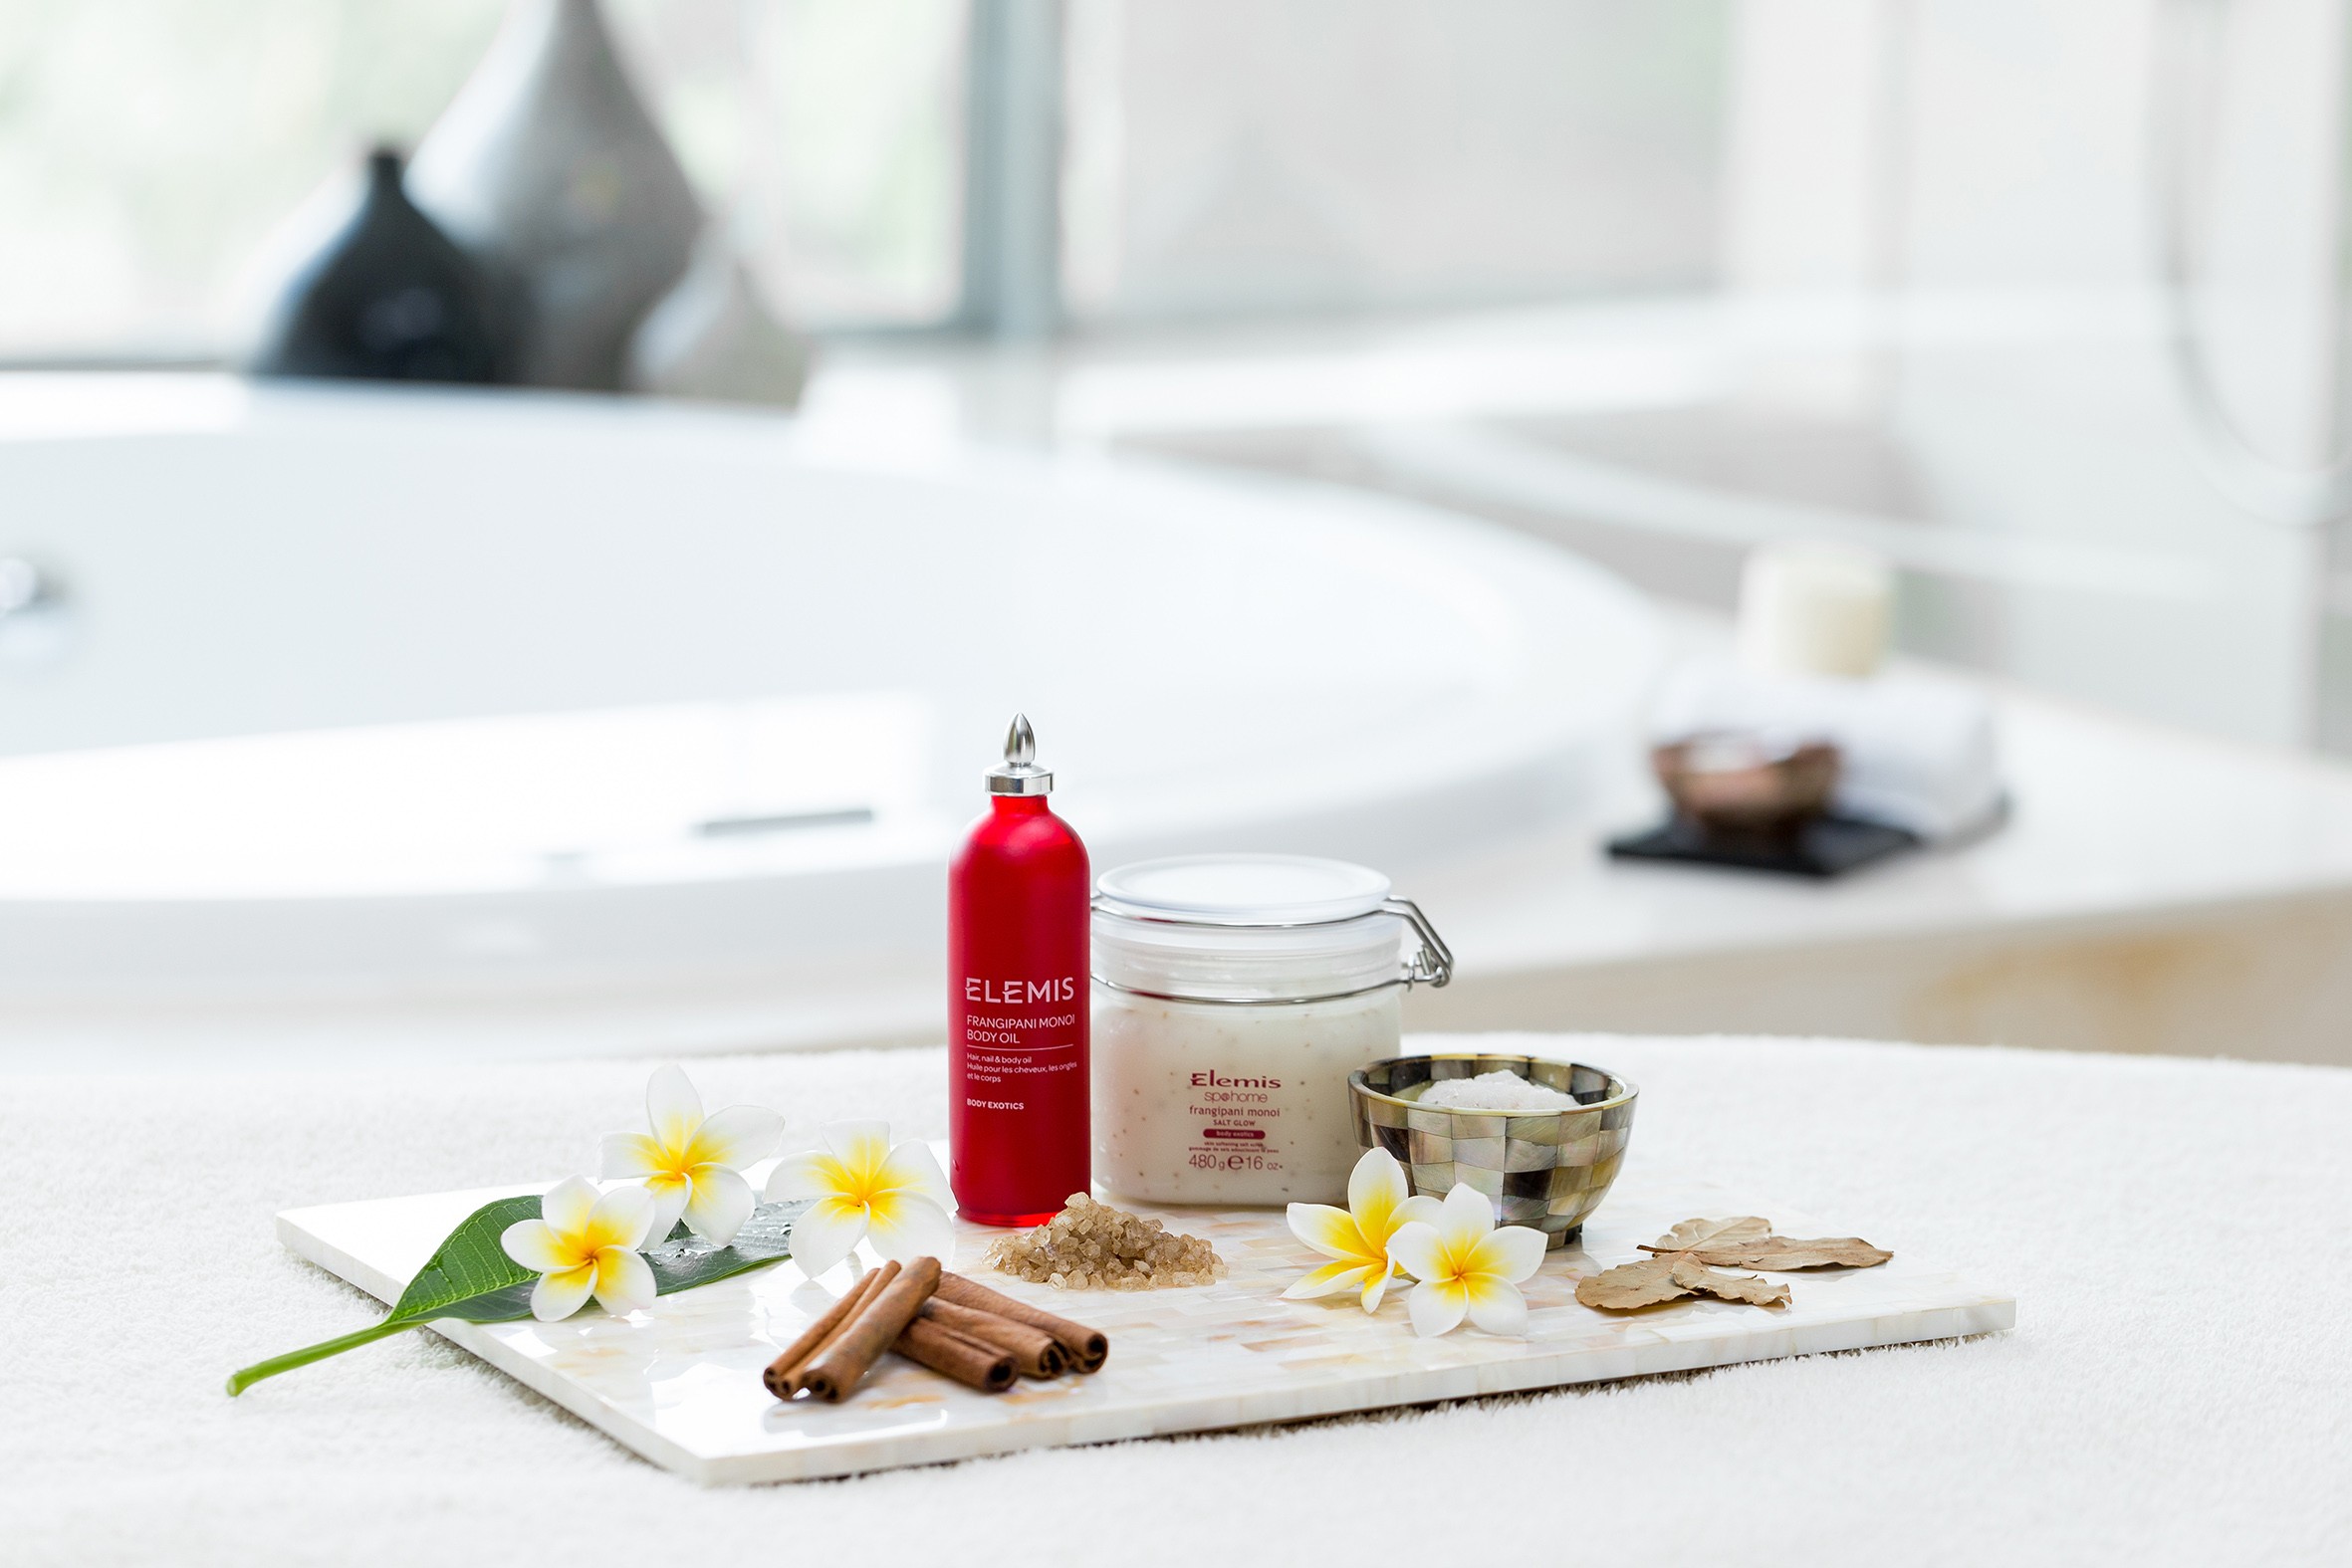 You can look forward to a relaxing 80-minute Nourishing Winter Treatment at Melo Spa.